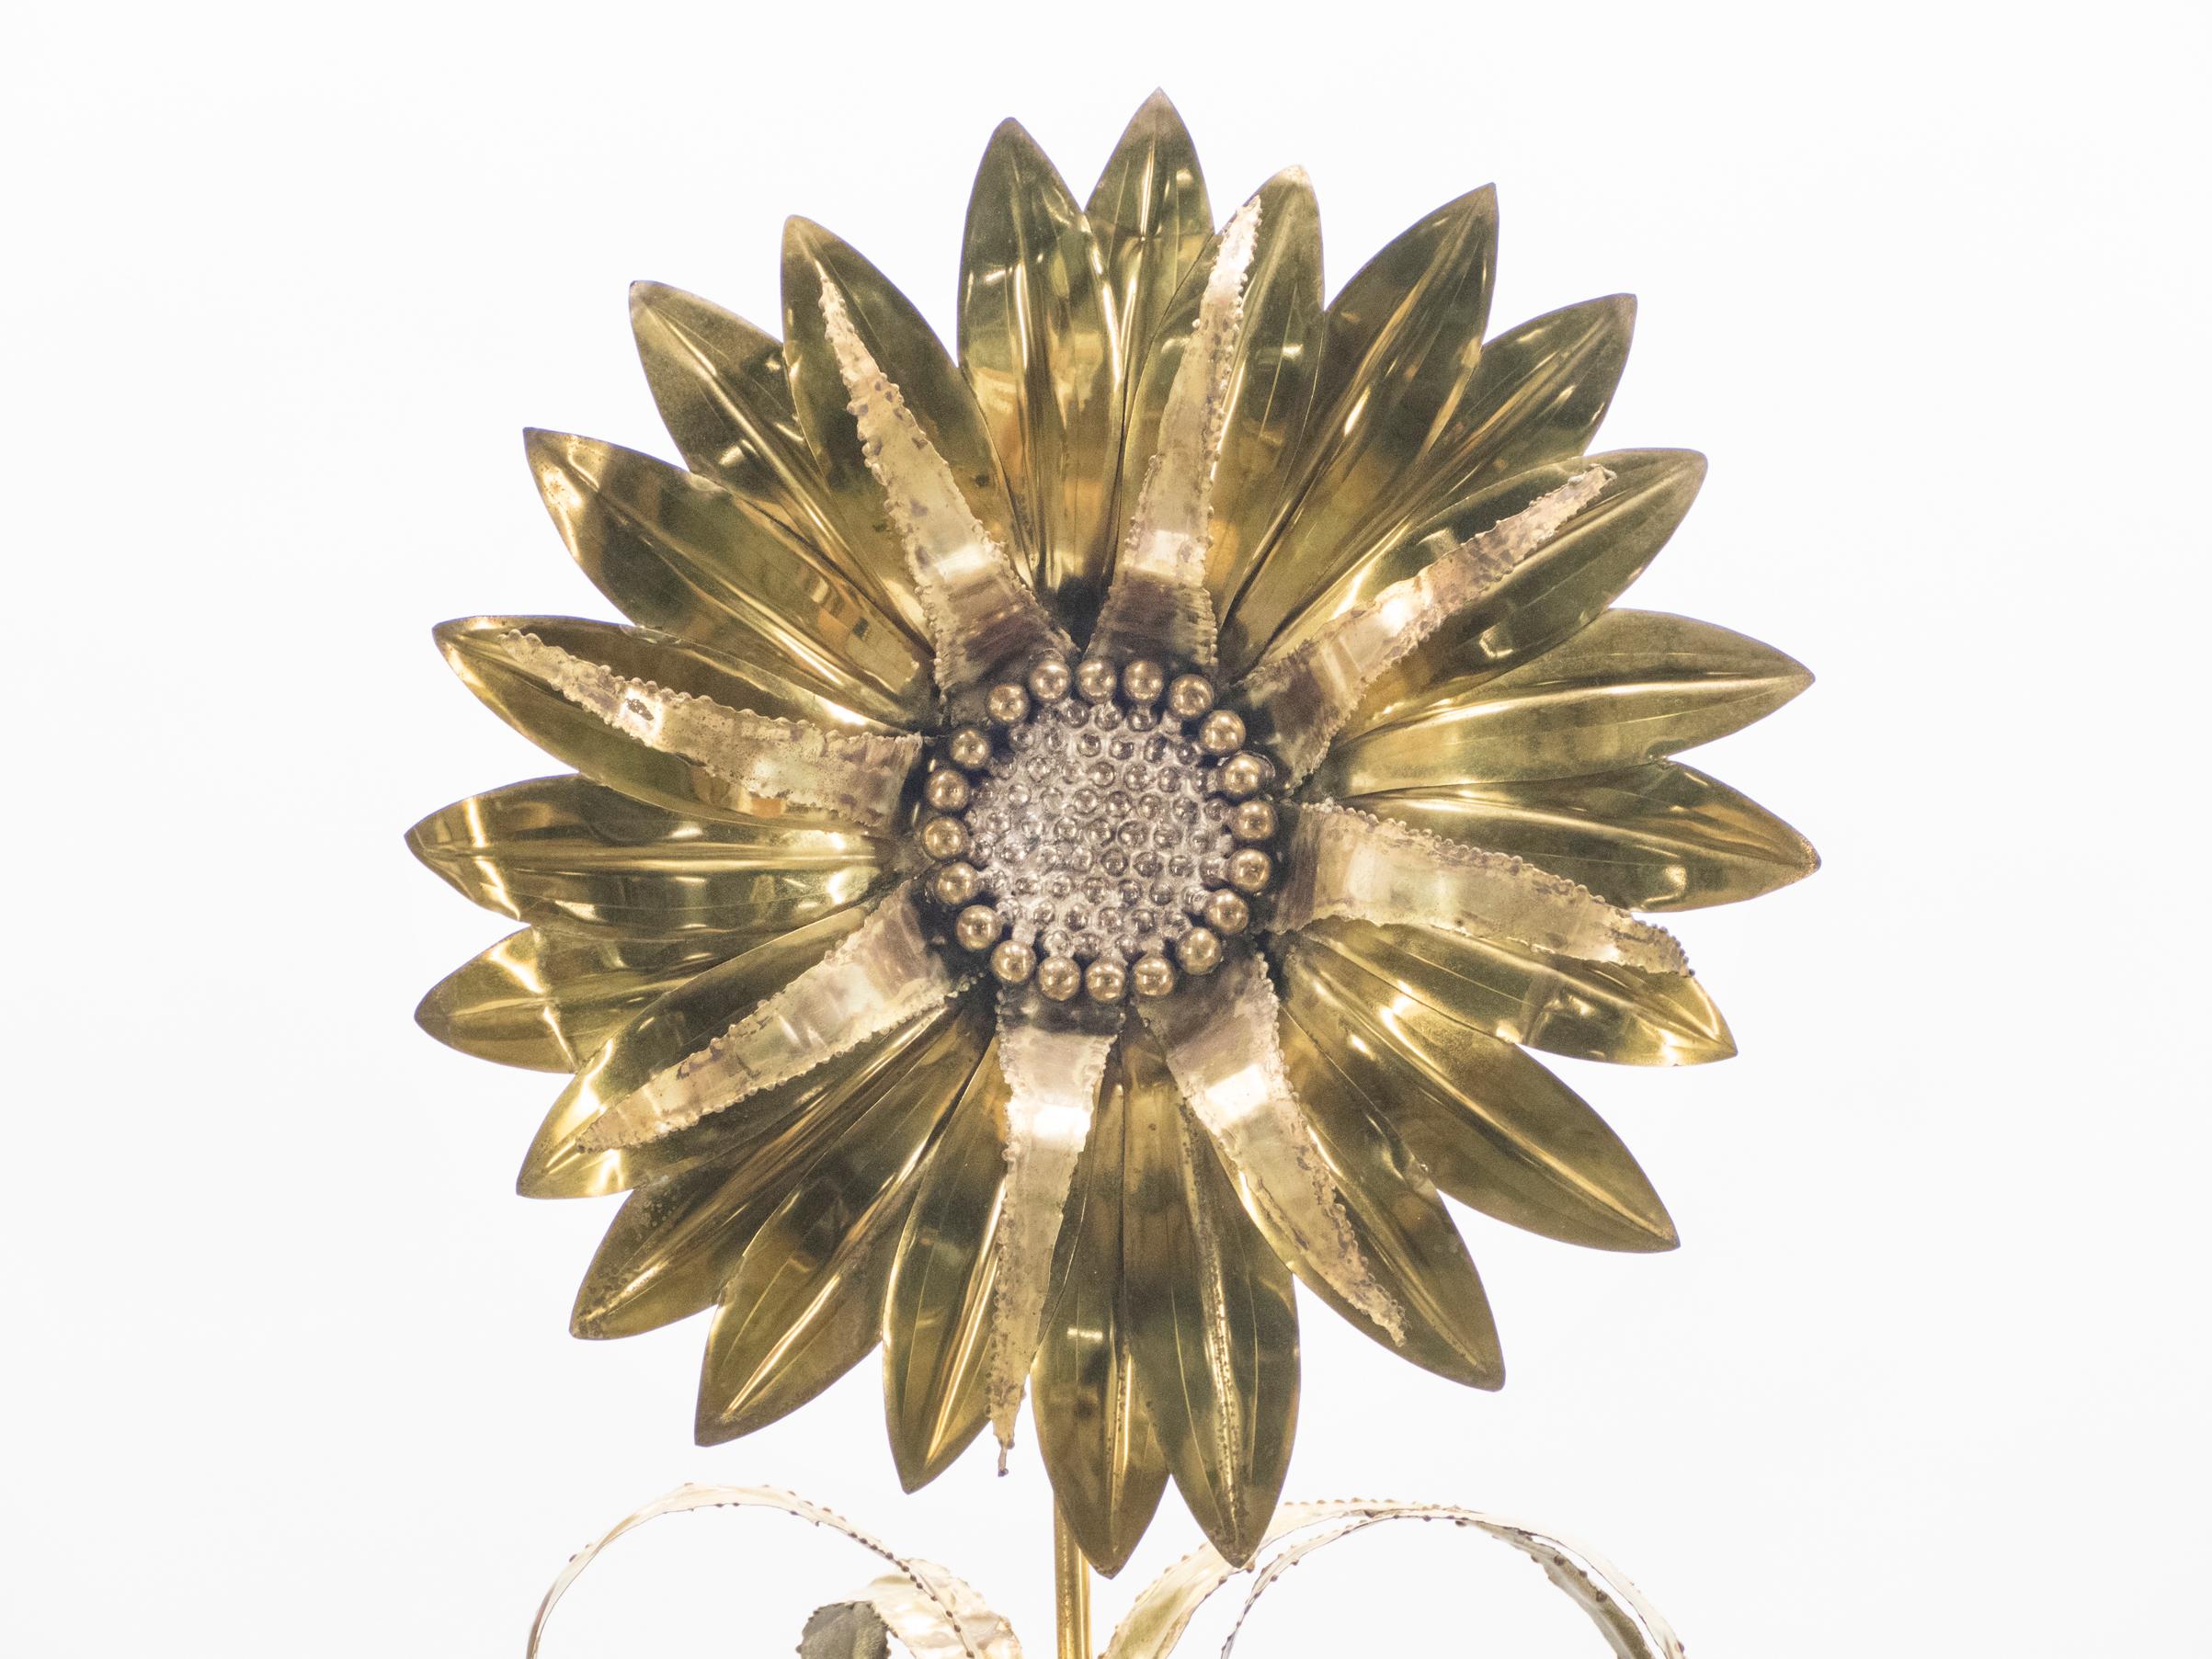 In this table lamp, an oversized, bold sunflower made of brass is lit up from behind by four separate bulbs, casting cheerful, glowy reflections throughout your space. The lamp was made by renowned French design firm Maison Jansen during the 1970s